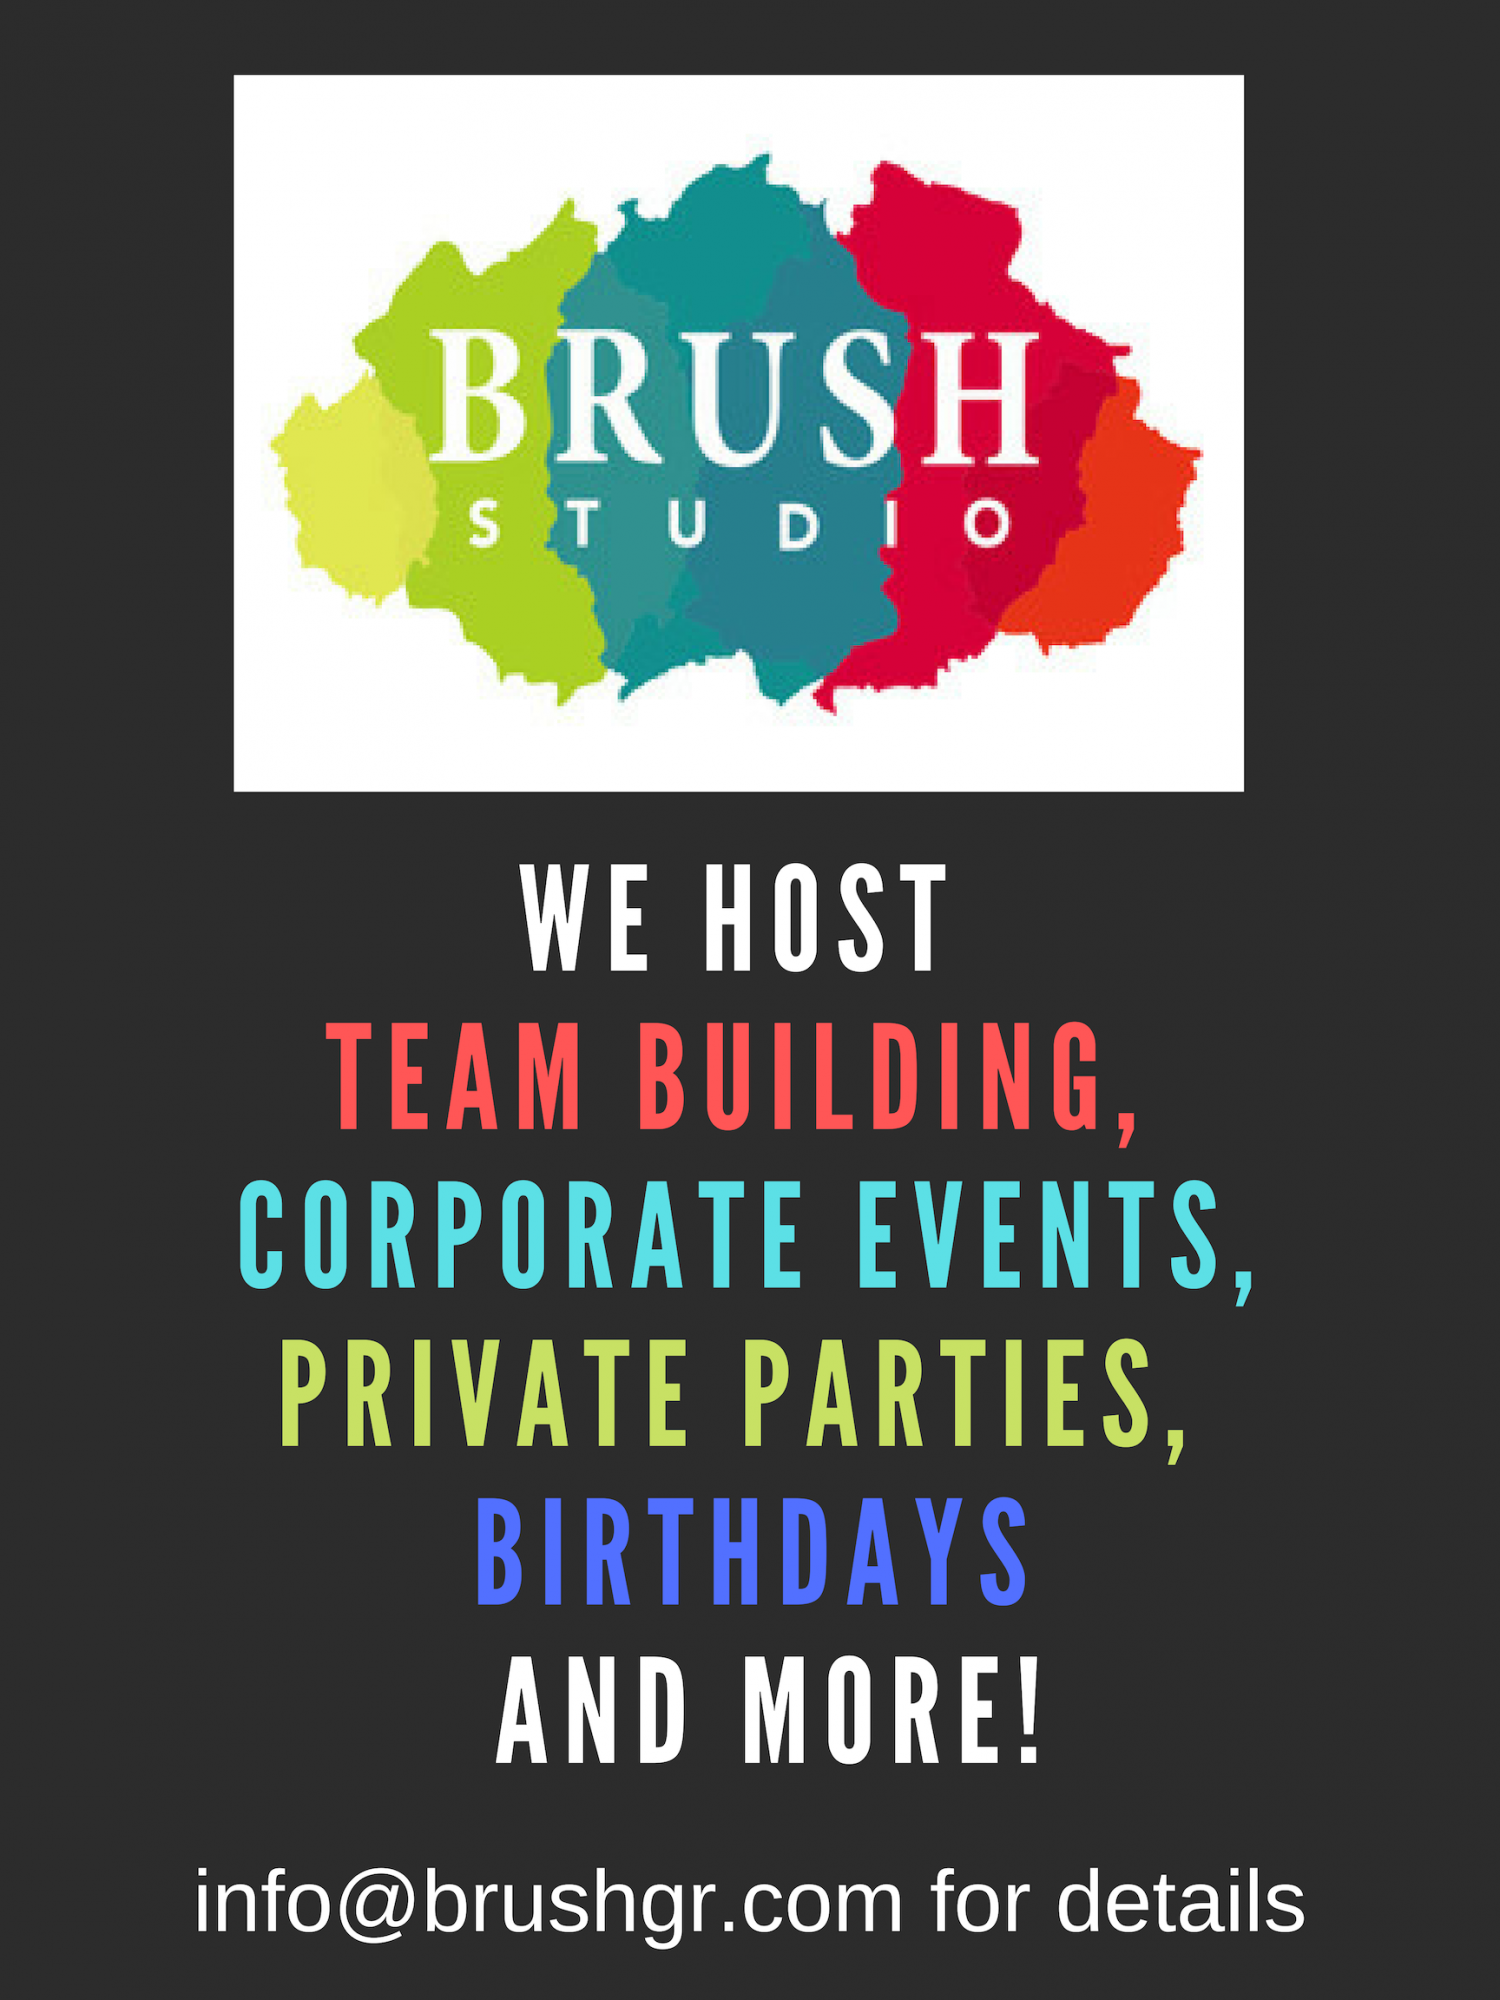 BOOK YOUR PRIVATE PARTIES WITH US THIS MONTH